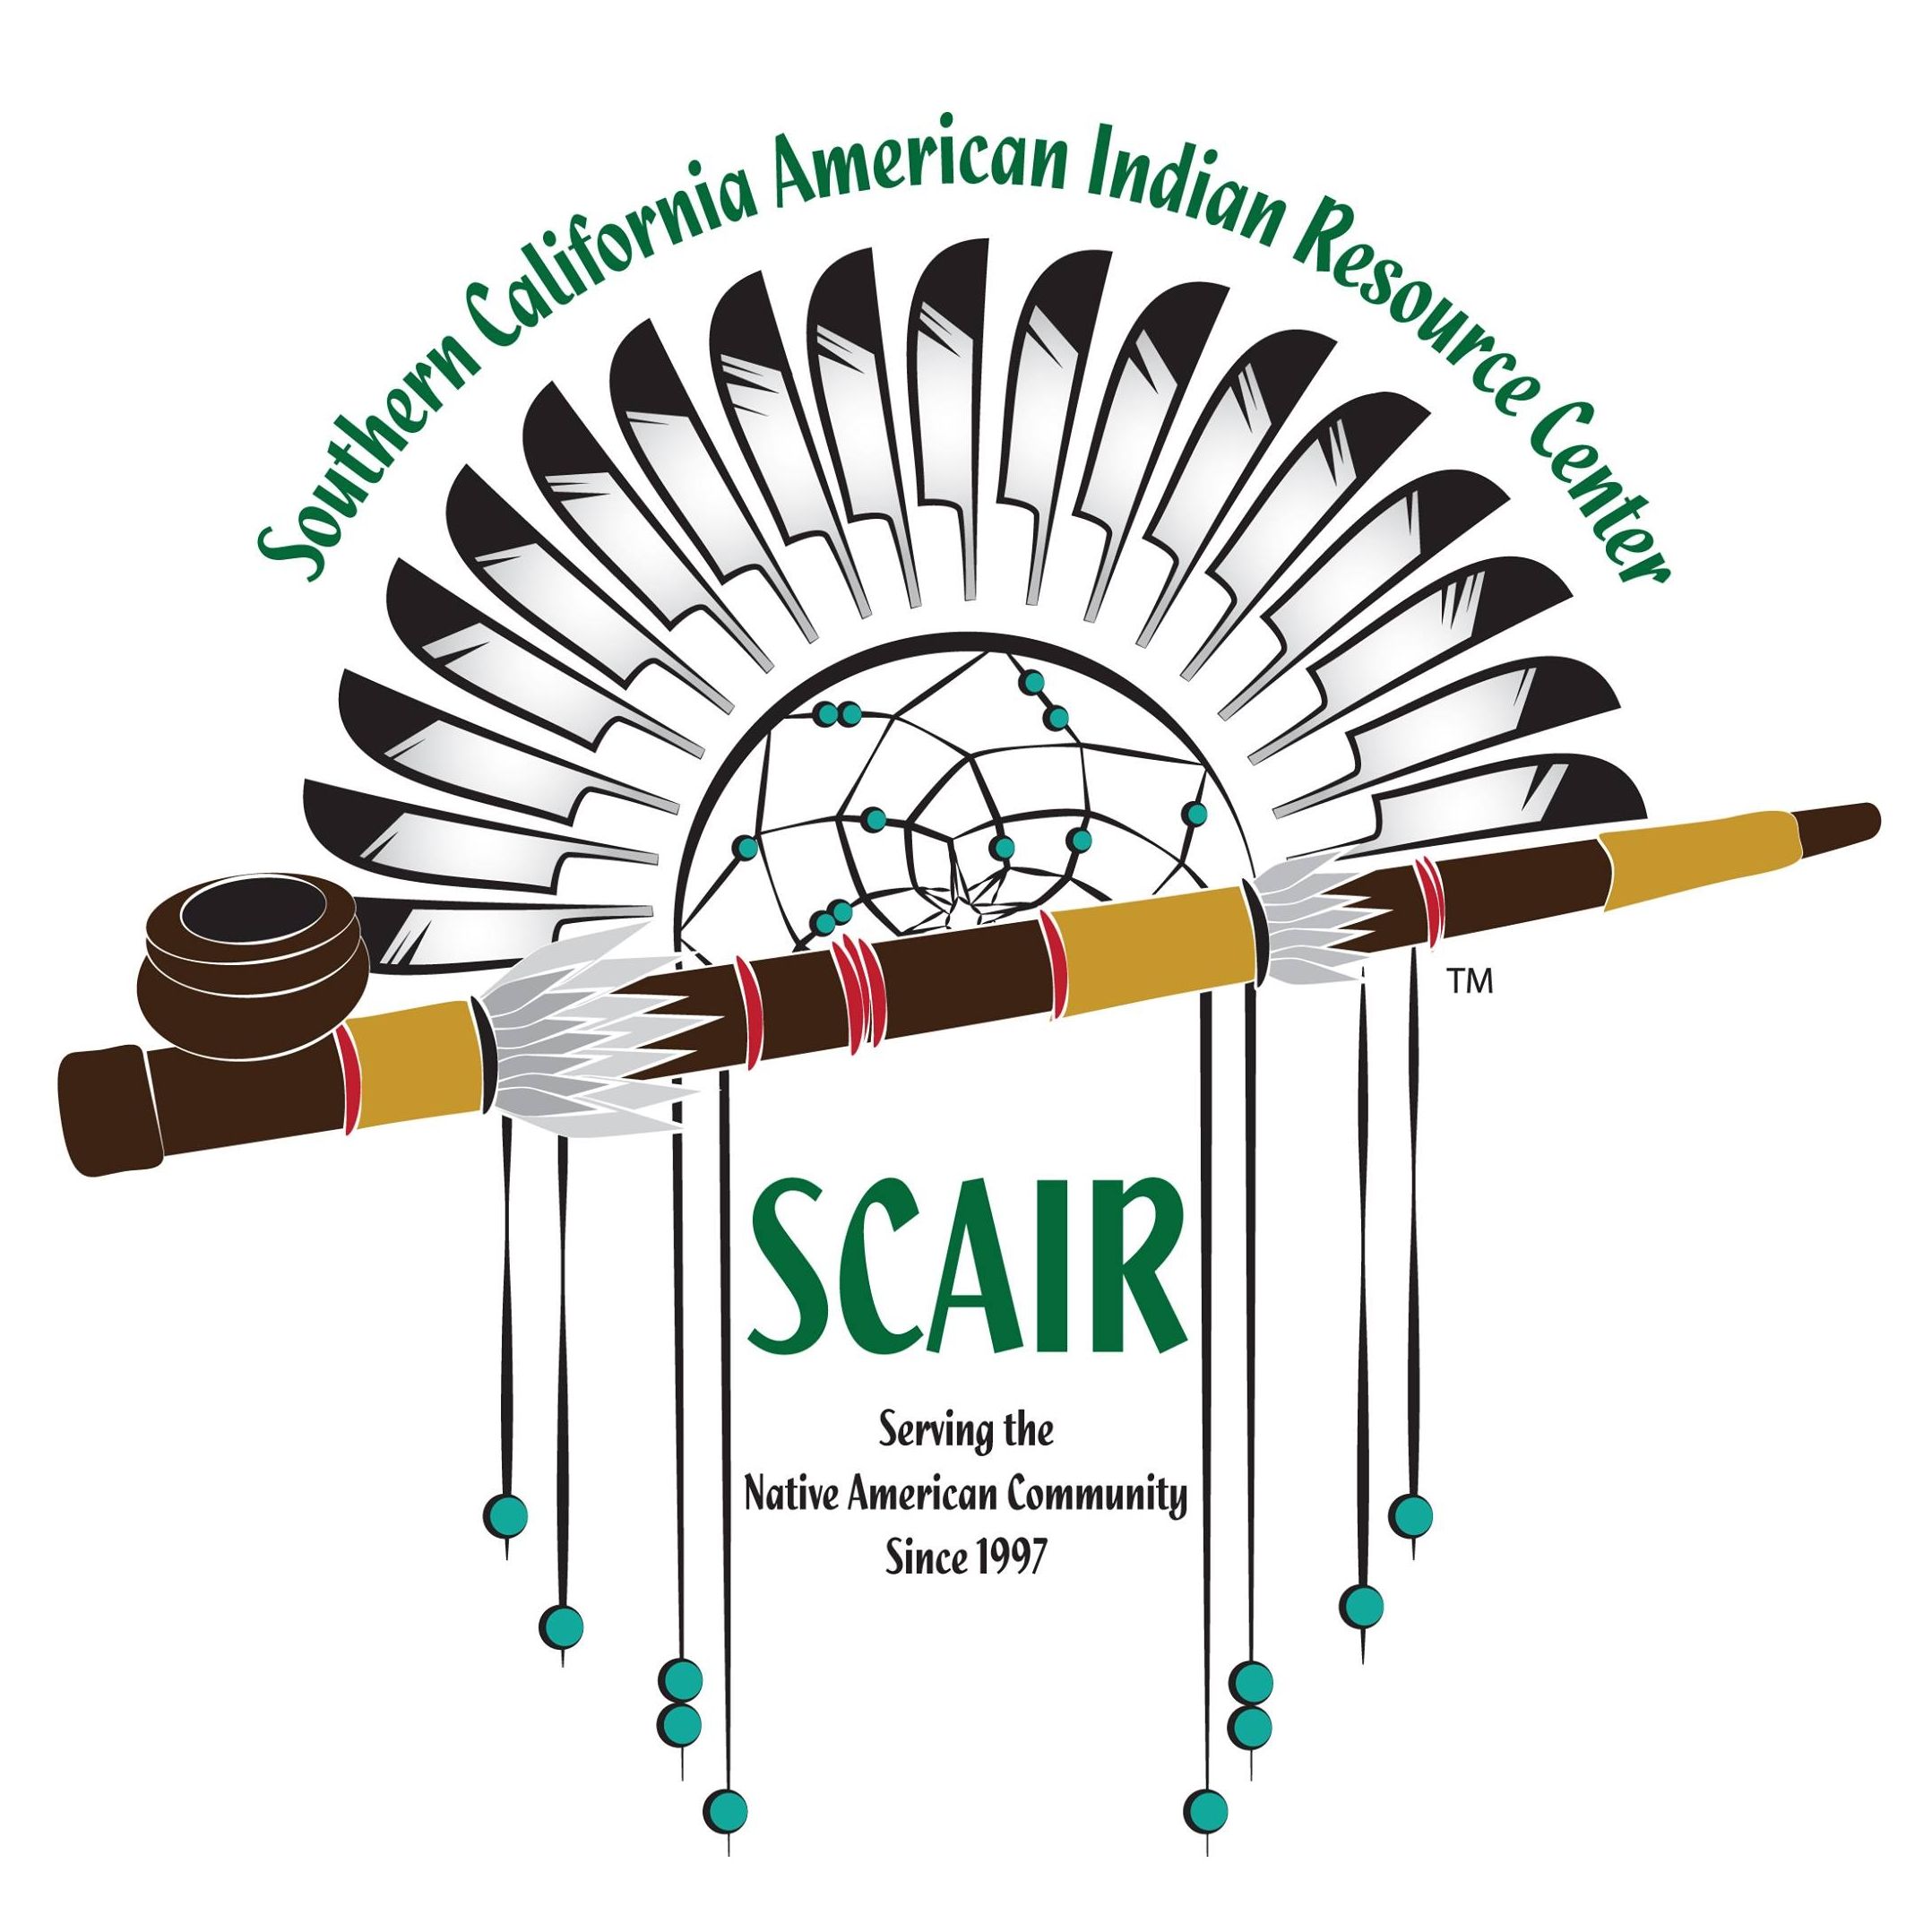 Native American Organizations in Los Angeles California - Southern California American Indian Resource Center, Inc.